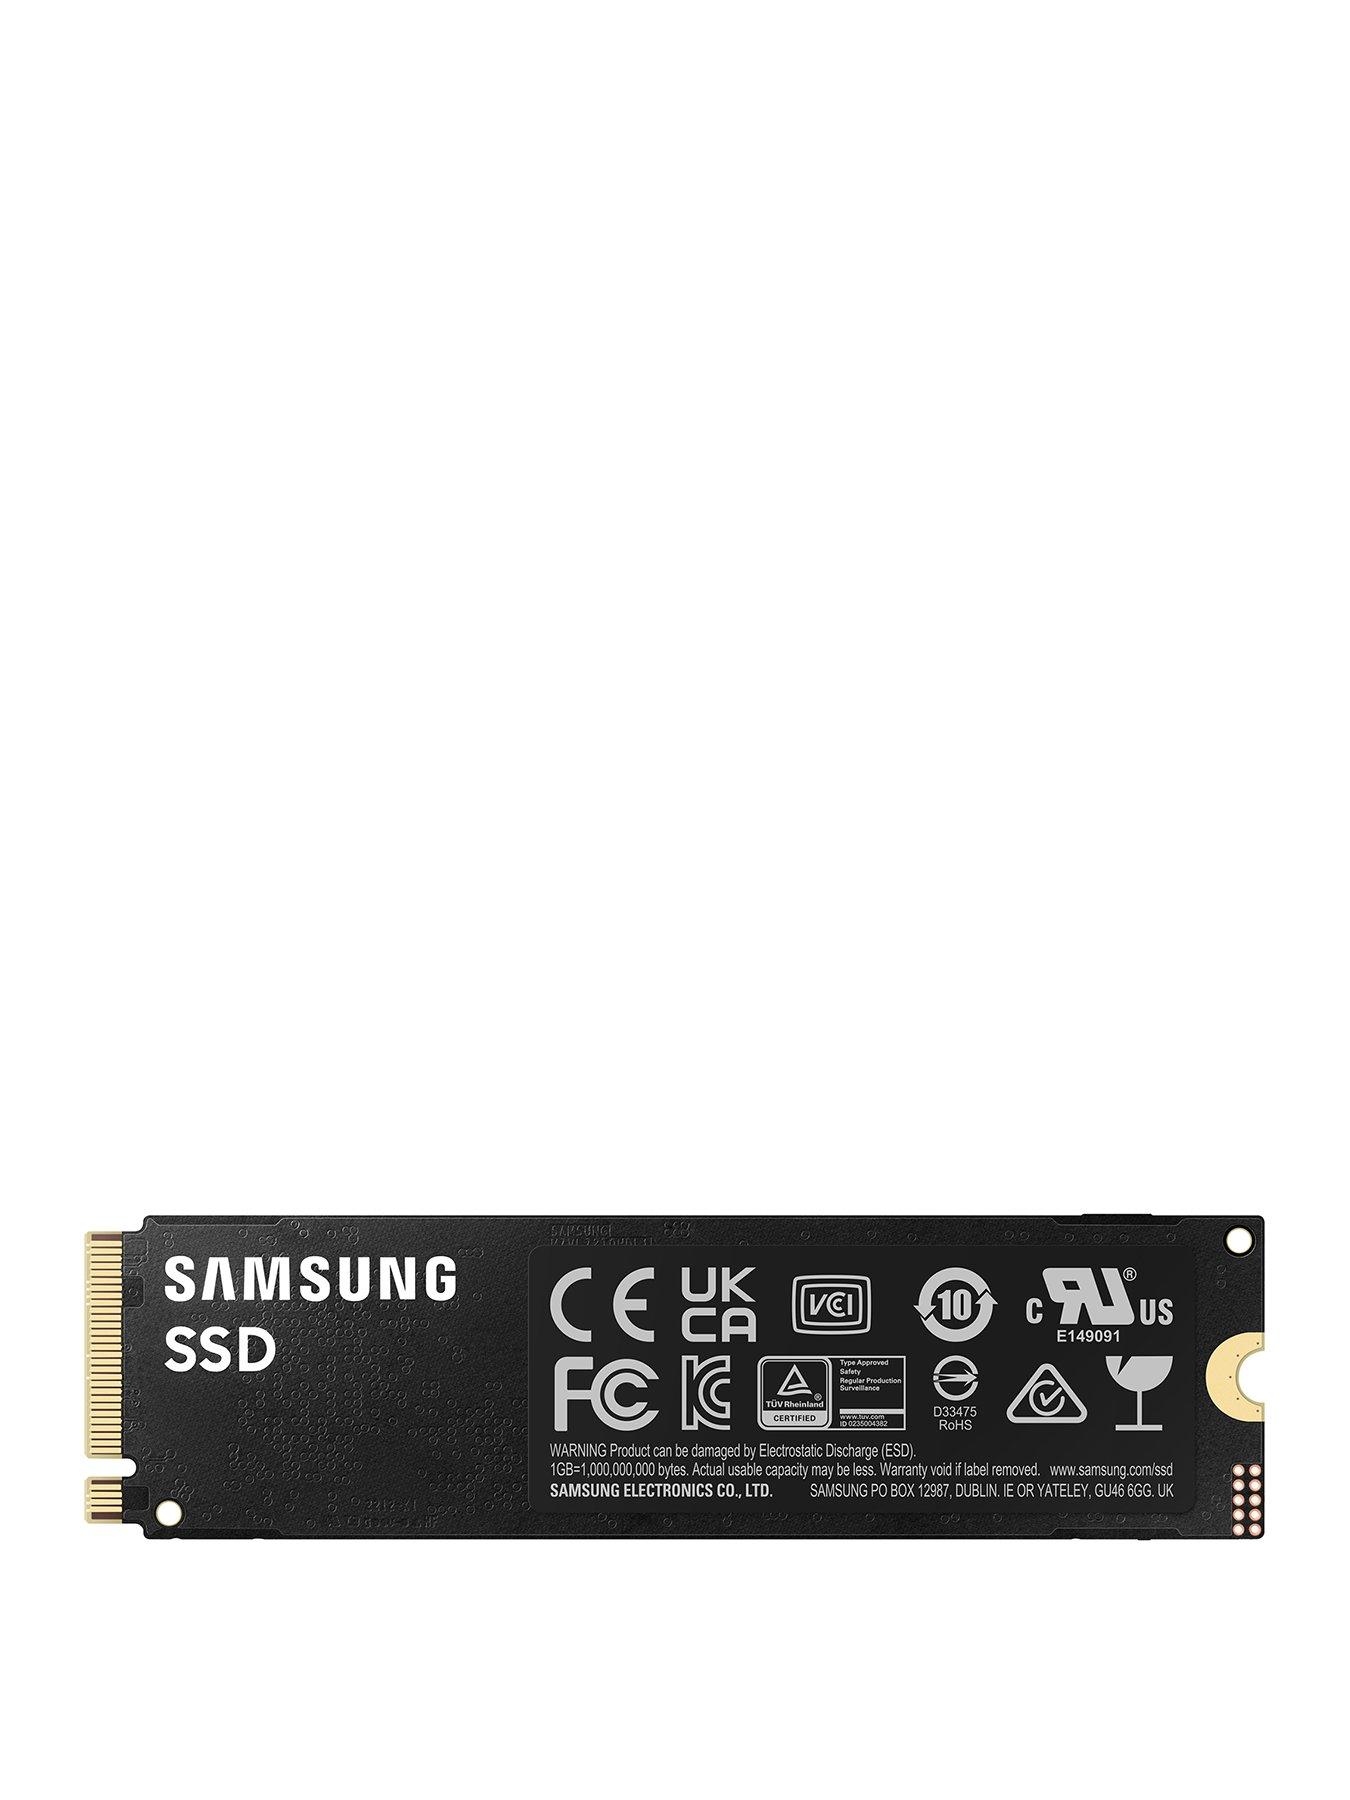 Samsung 990 Pro PCIe Gen 4.0 x4, NVMe 1.3c 1TB Solid State Drive